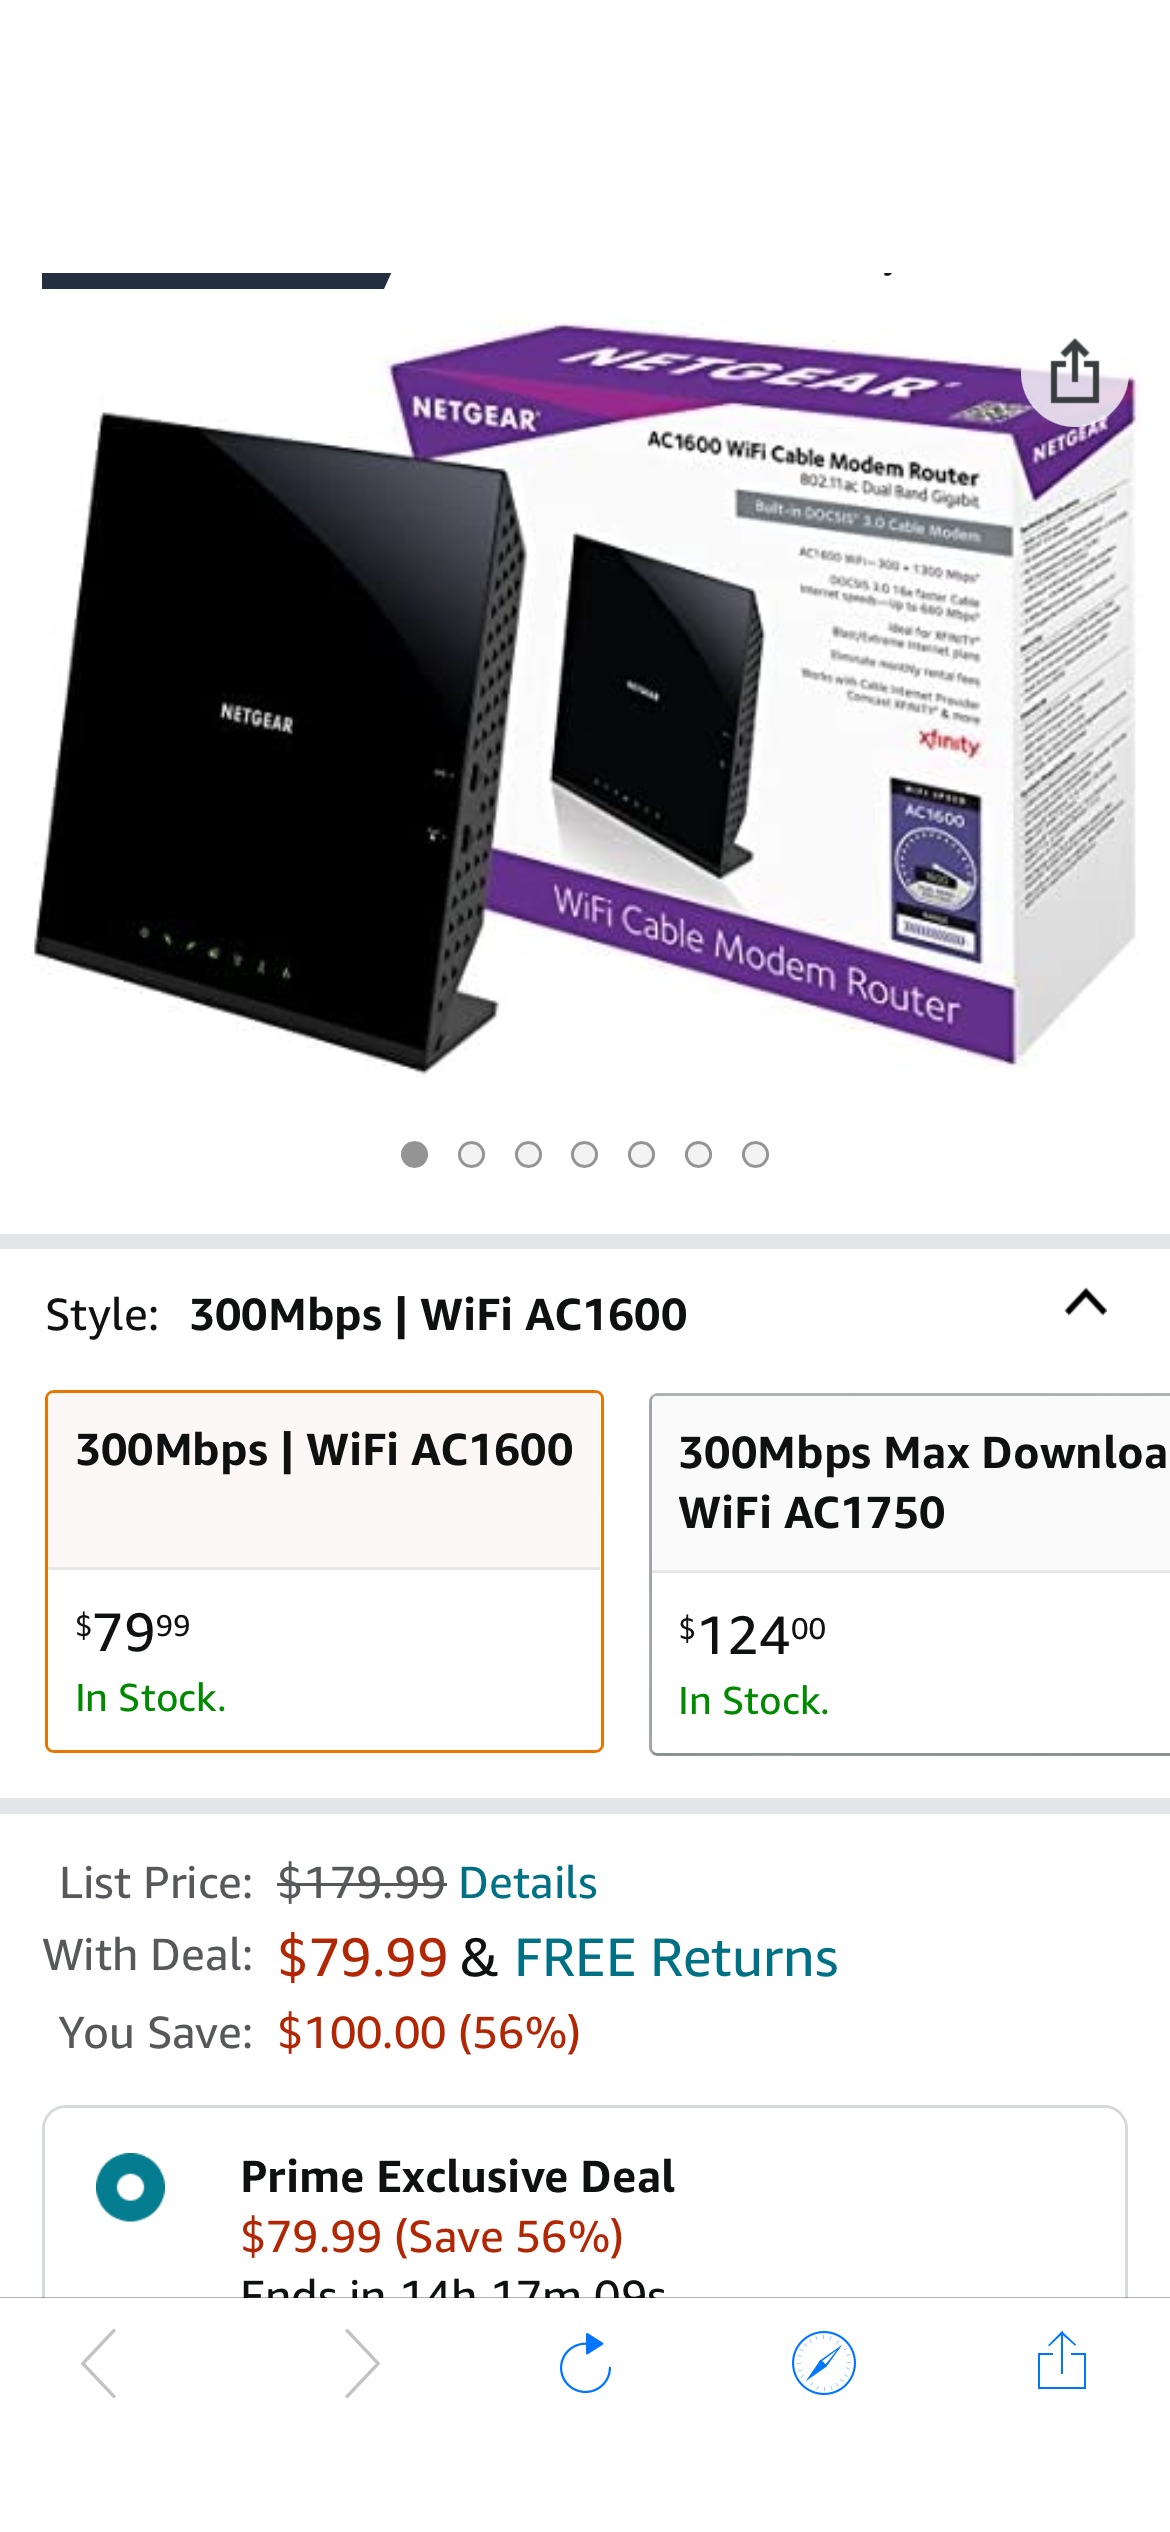 Wi-Fi 路由器，4折优惠。Netgear C6250-100NAS AC1600 (16x4) WiFi Cable Modem Router Combo (C6250) DOCSIS 3.0 Certified for Xfinity Comcast, Time Warner Cable, Cox, & more : Everything Else